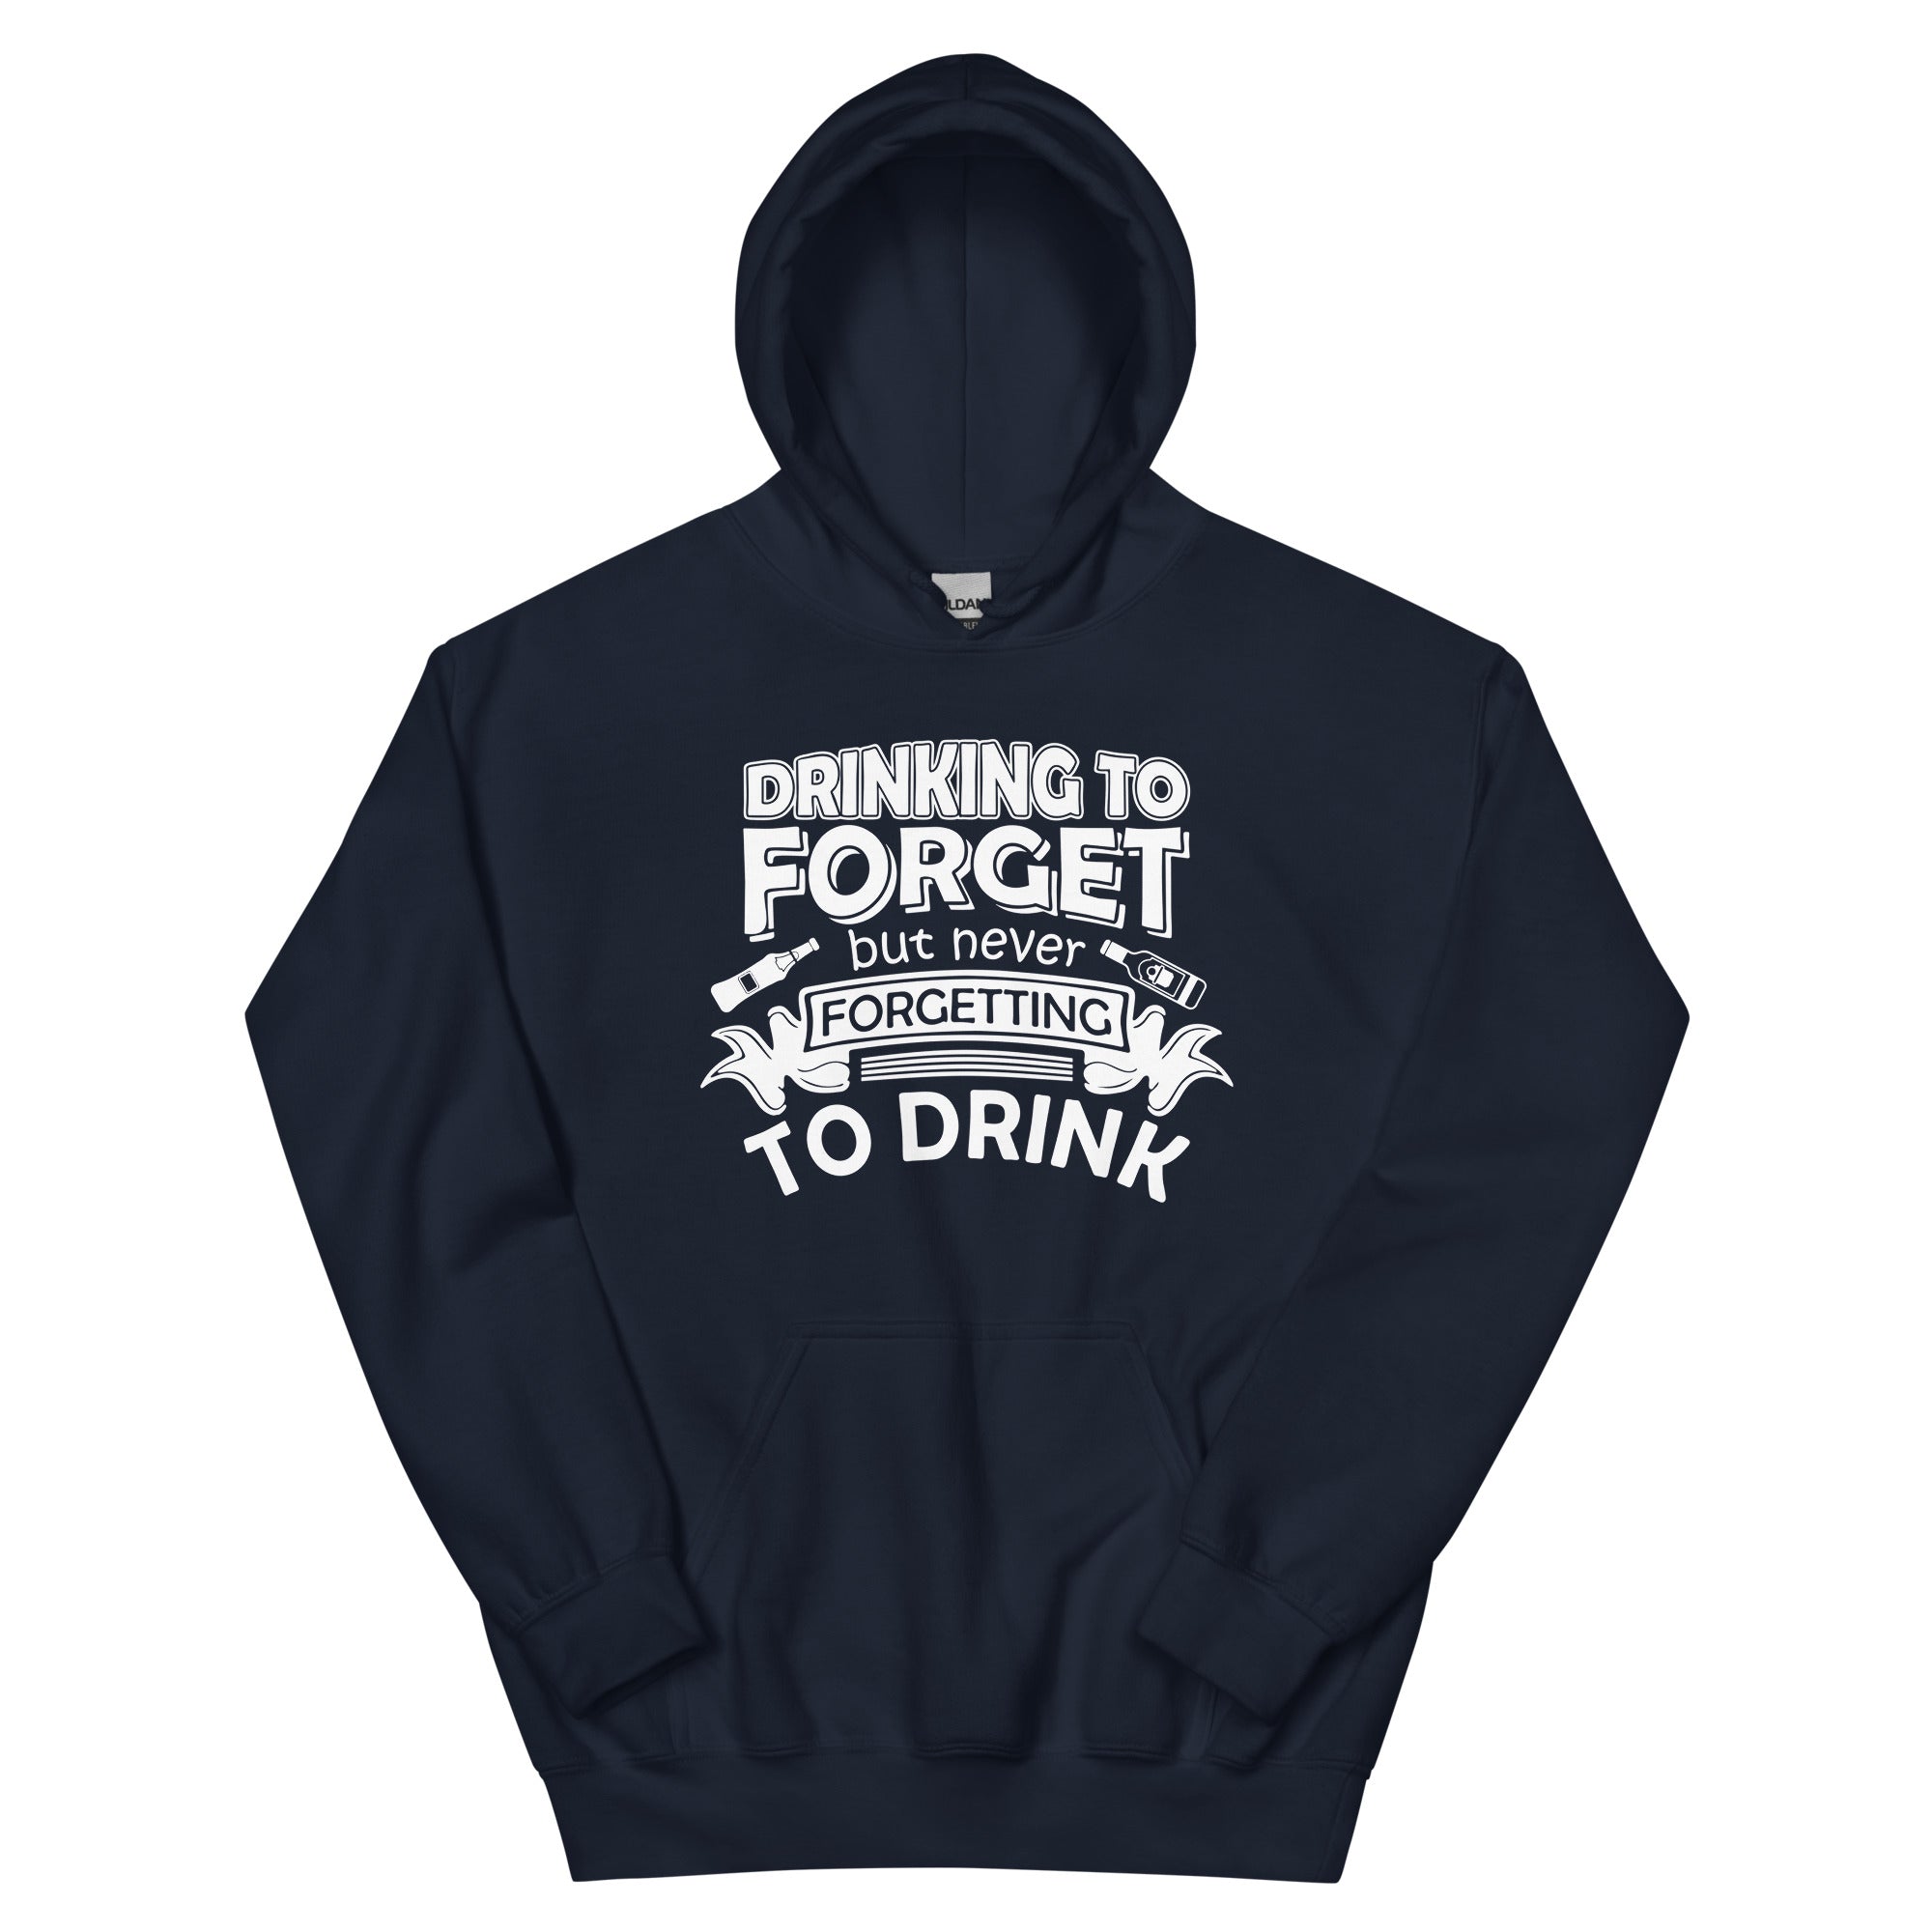 Drinking To Forget - Unisex Hoodie